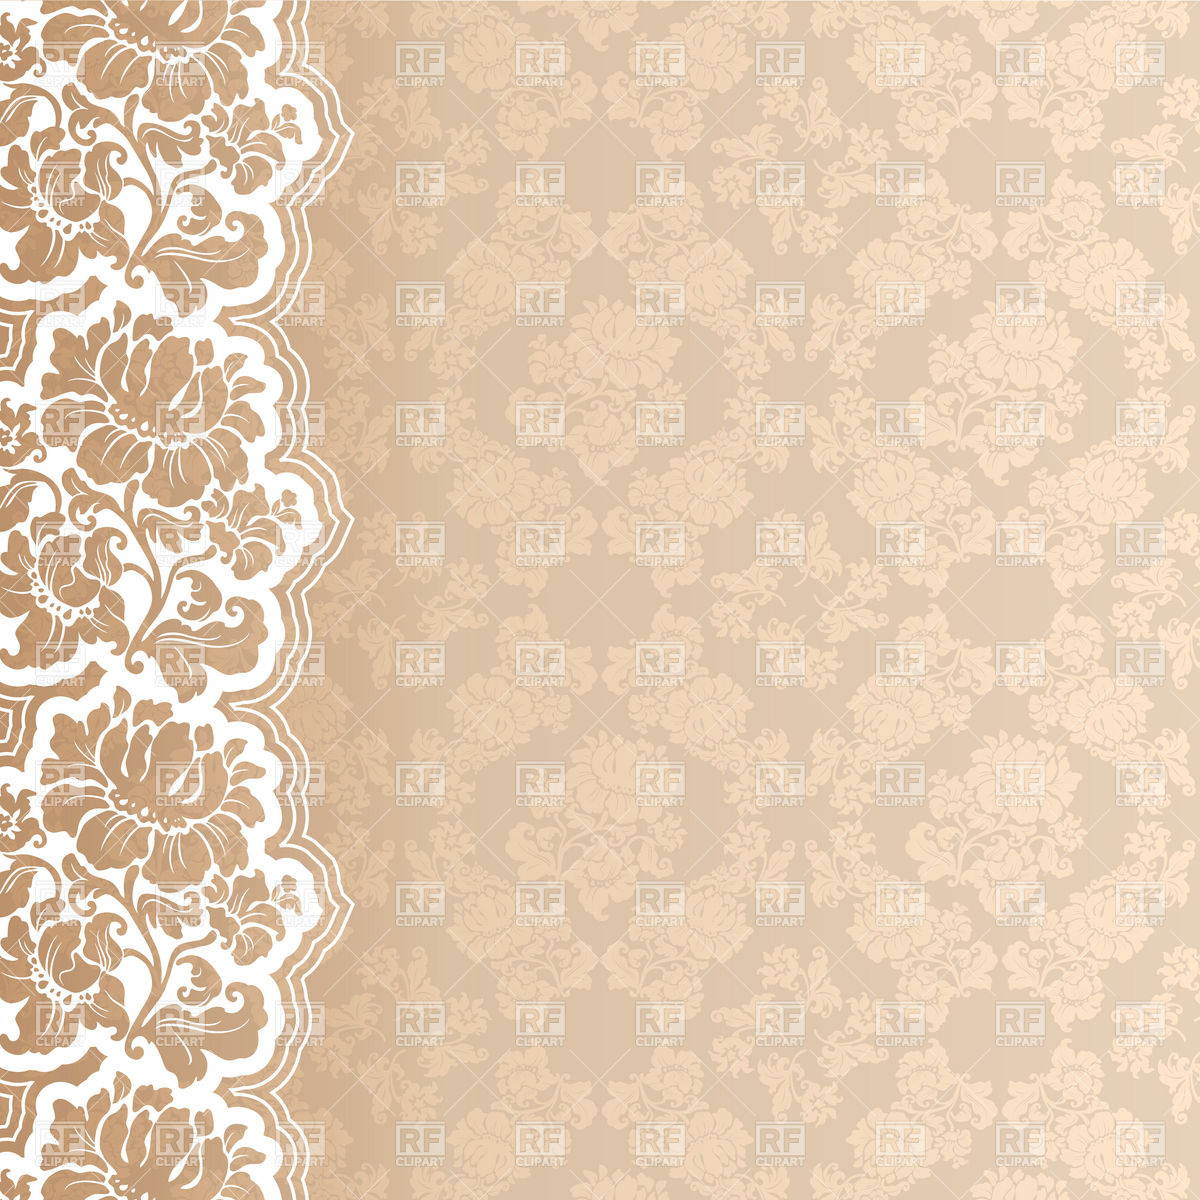 Wallpaper With Lace Border Download Royalty Free Vector Clipart  Eps